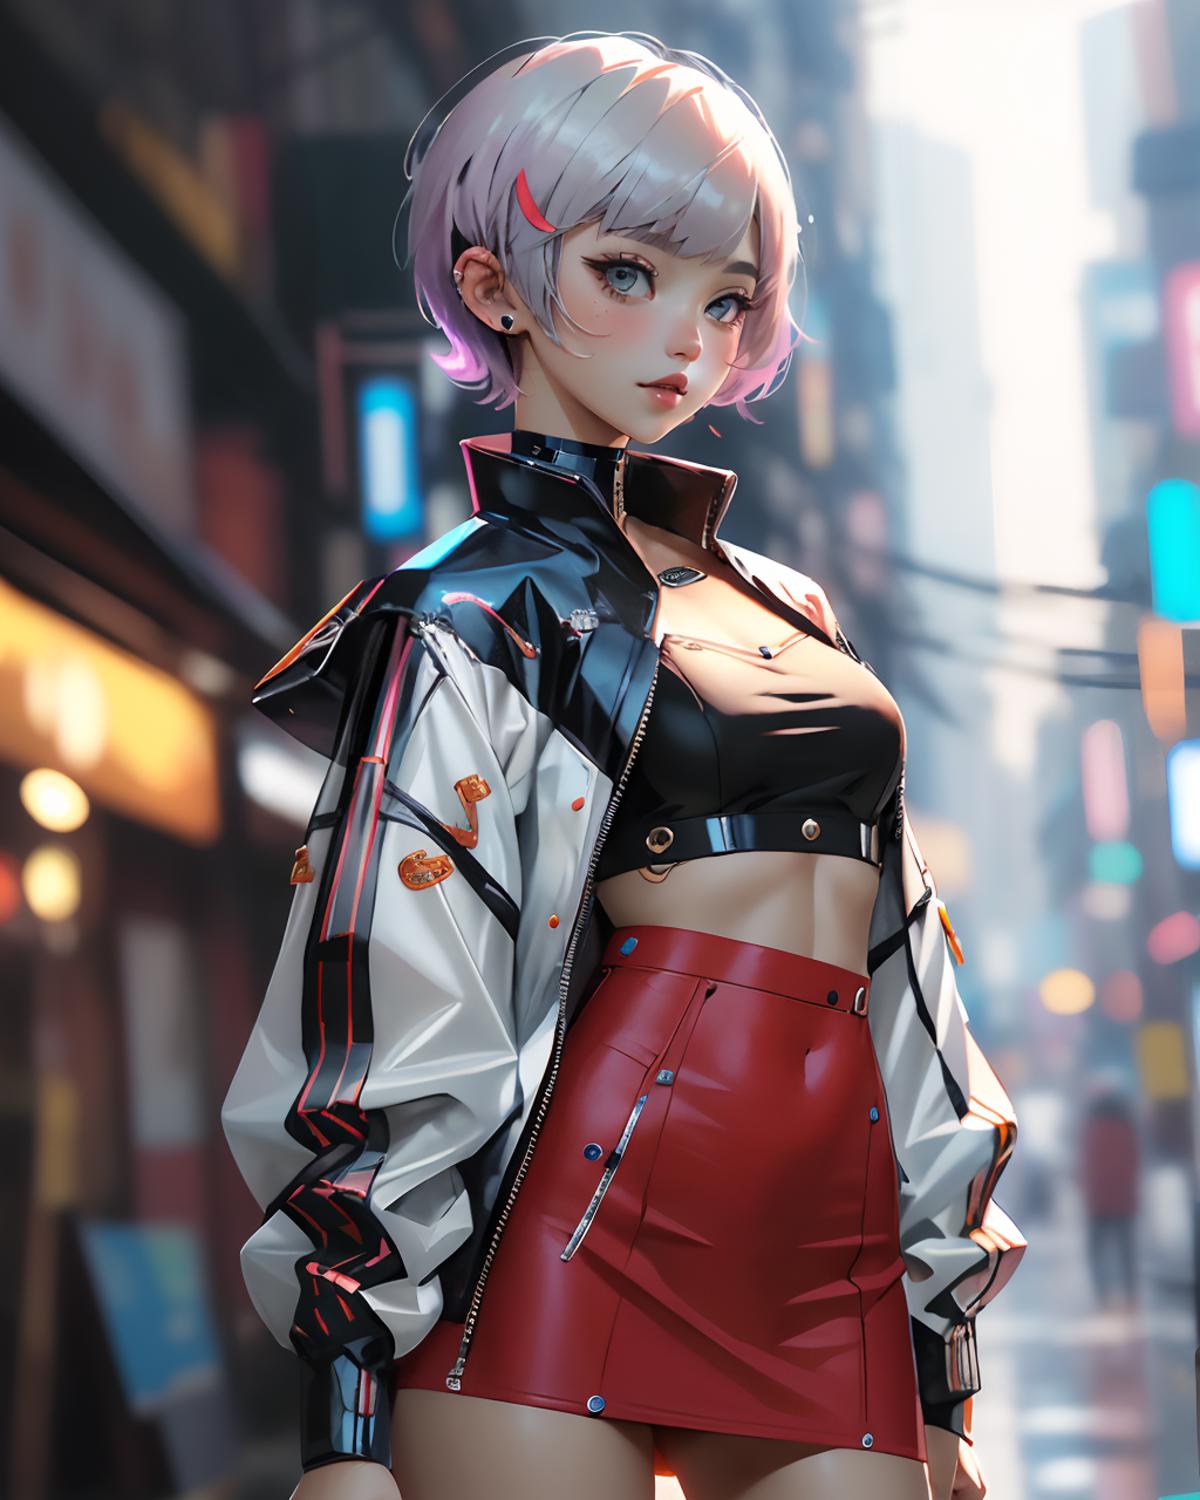 cyber style girl image by futurist